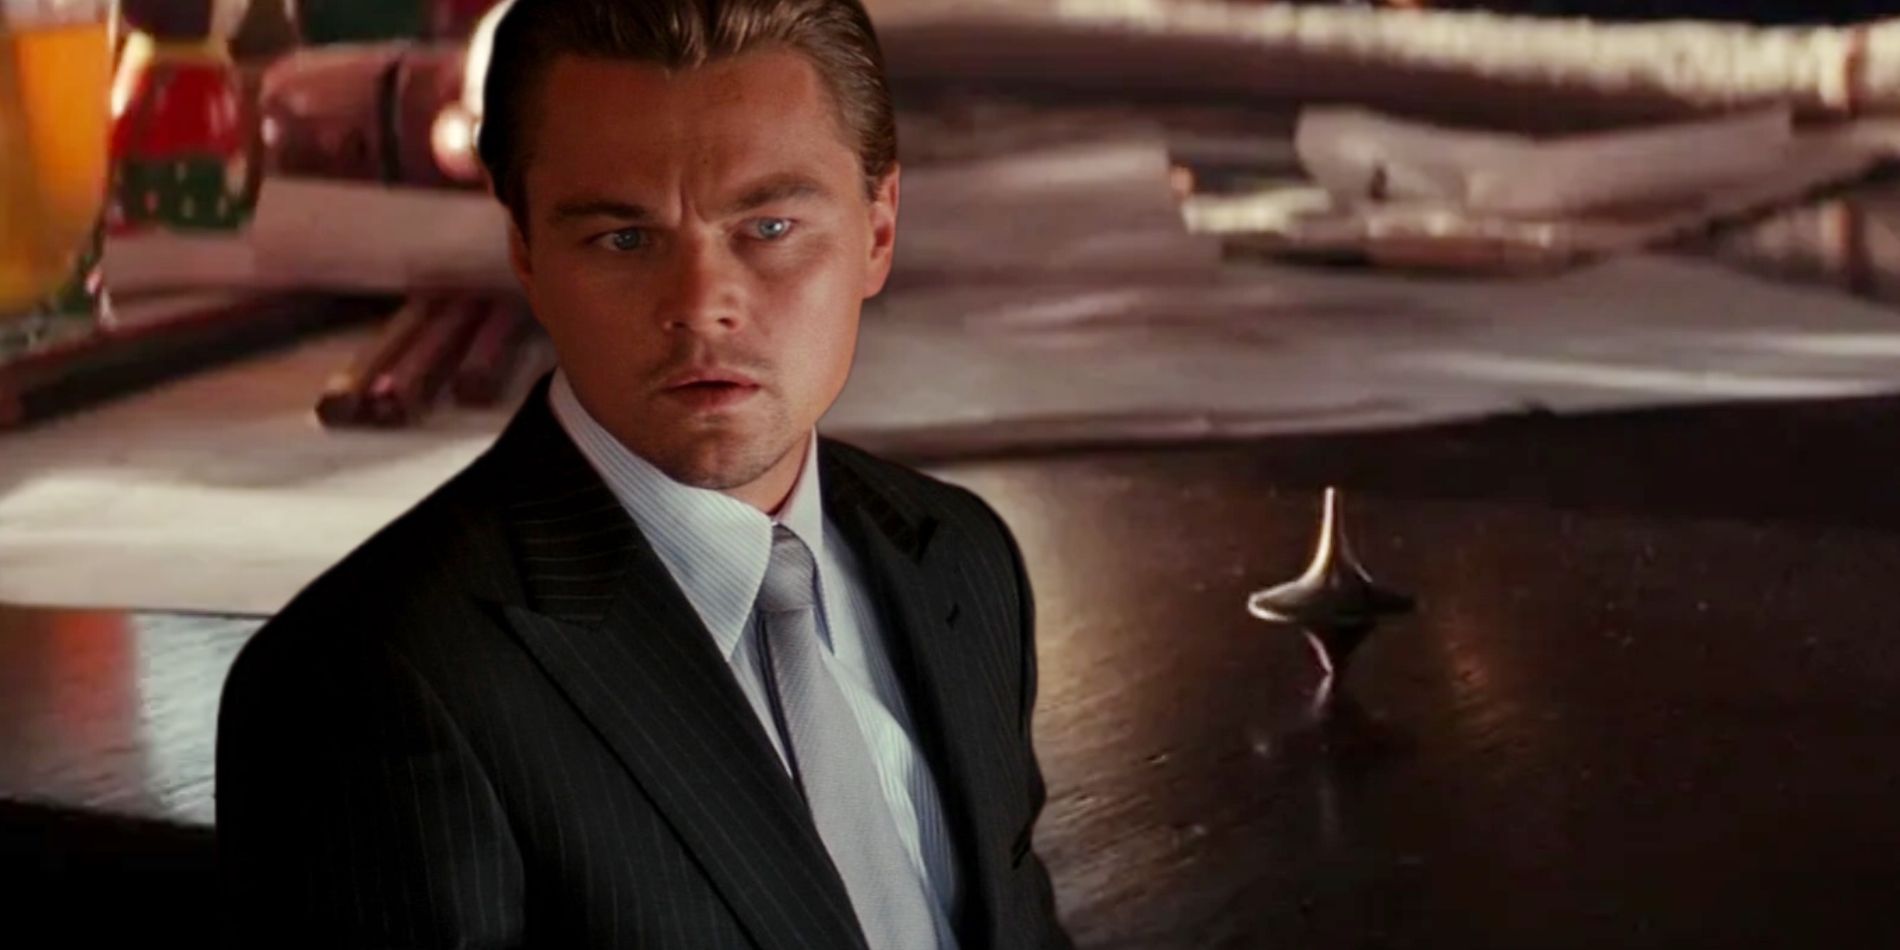 Leonardo DiCaprio in Inception Next To The Spinning Top Totem